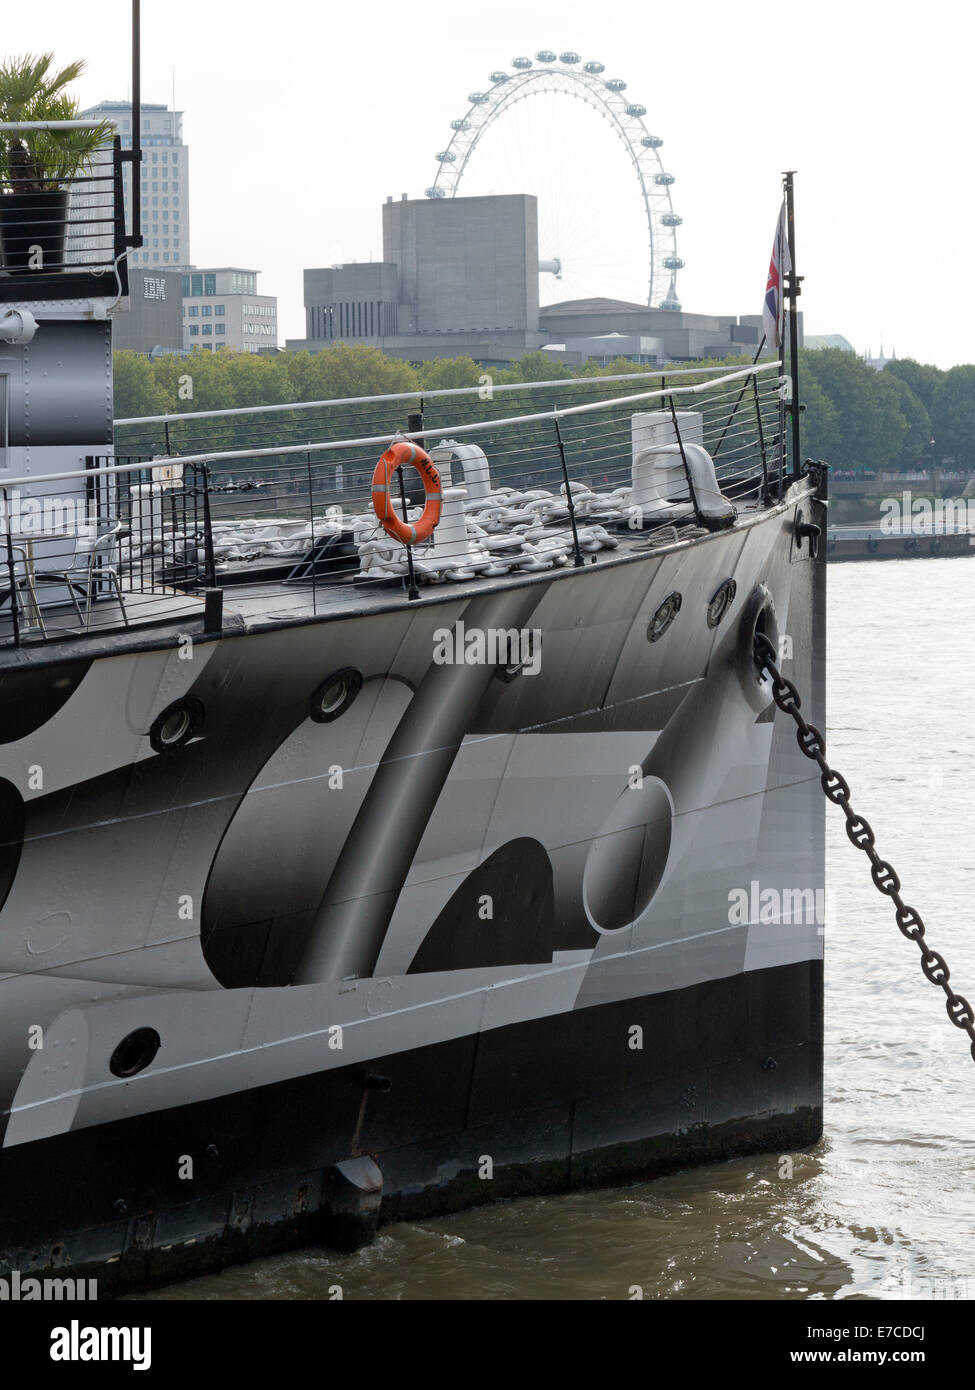 Prow of HMS President painted in 'surreal dazzle' camouflage designed by Tobias Rehberger River Thames, London Stock Photo